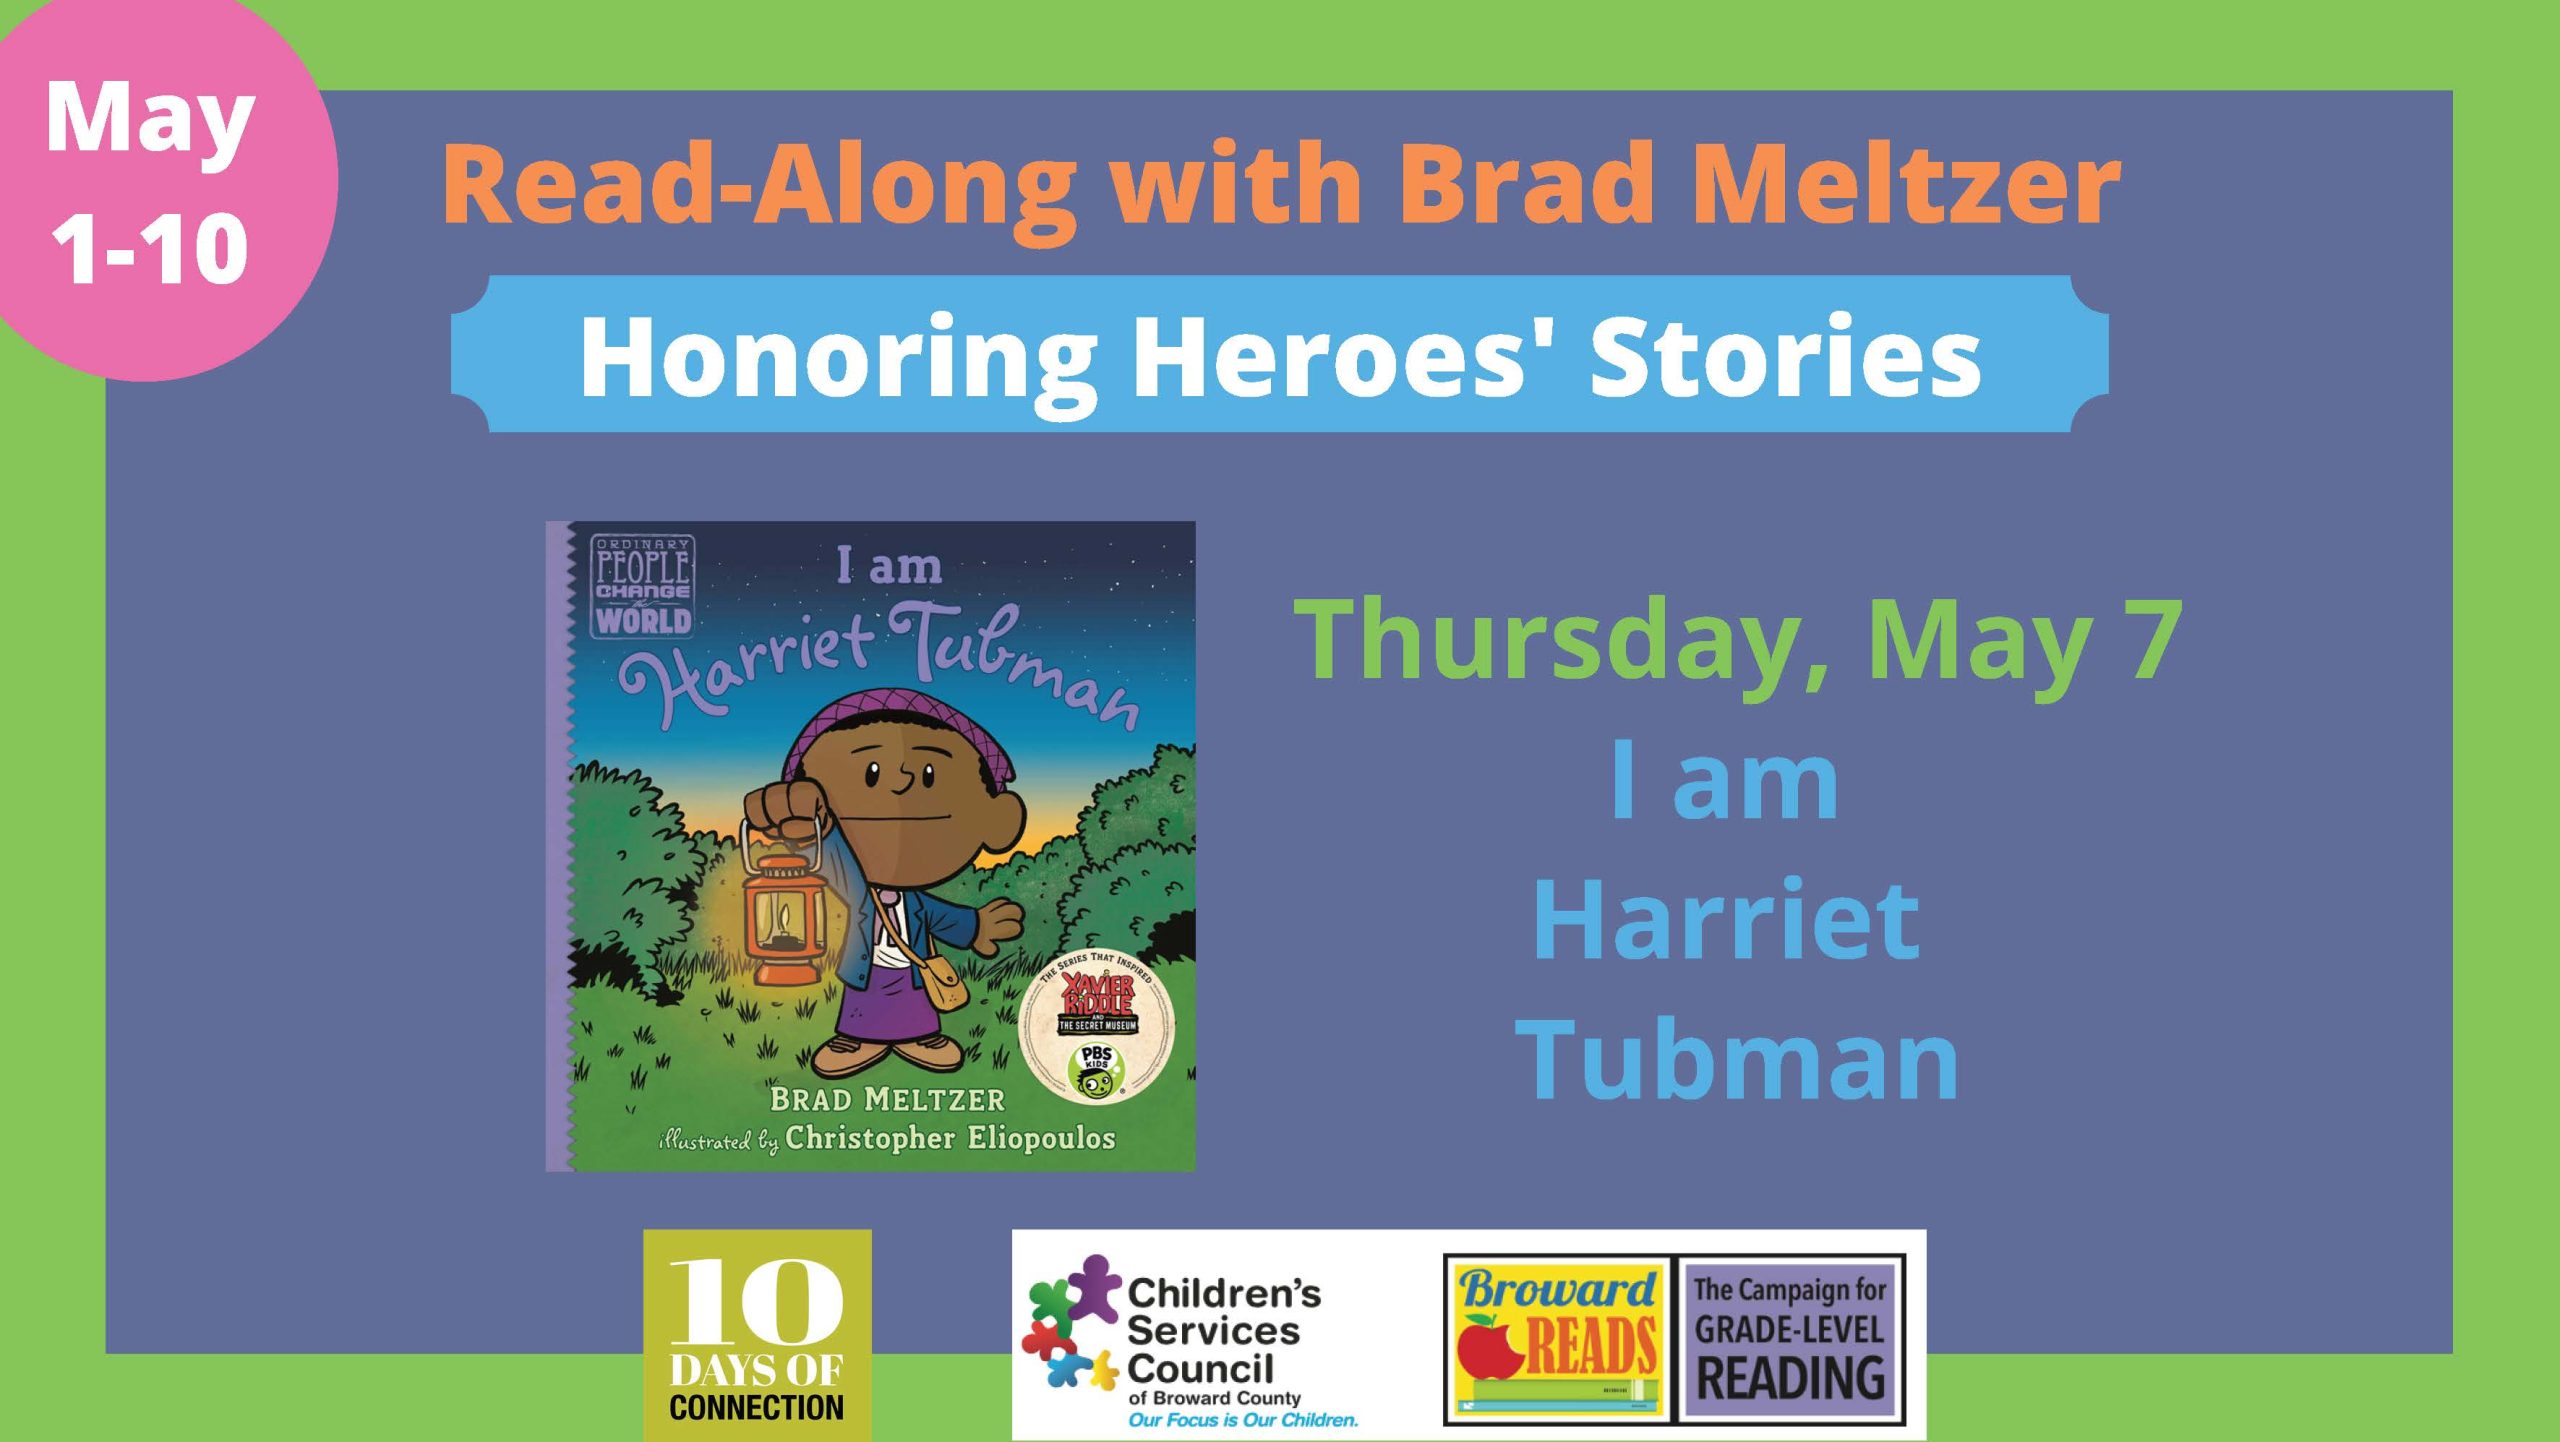 read along with brad meltzer image 5